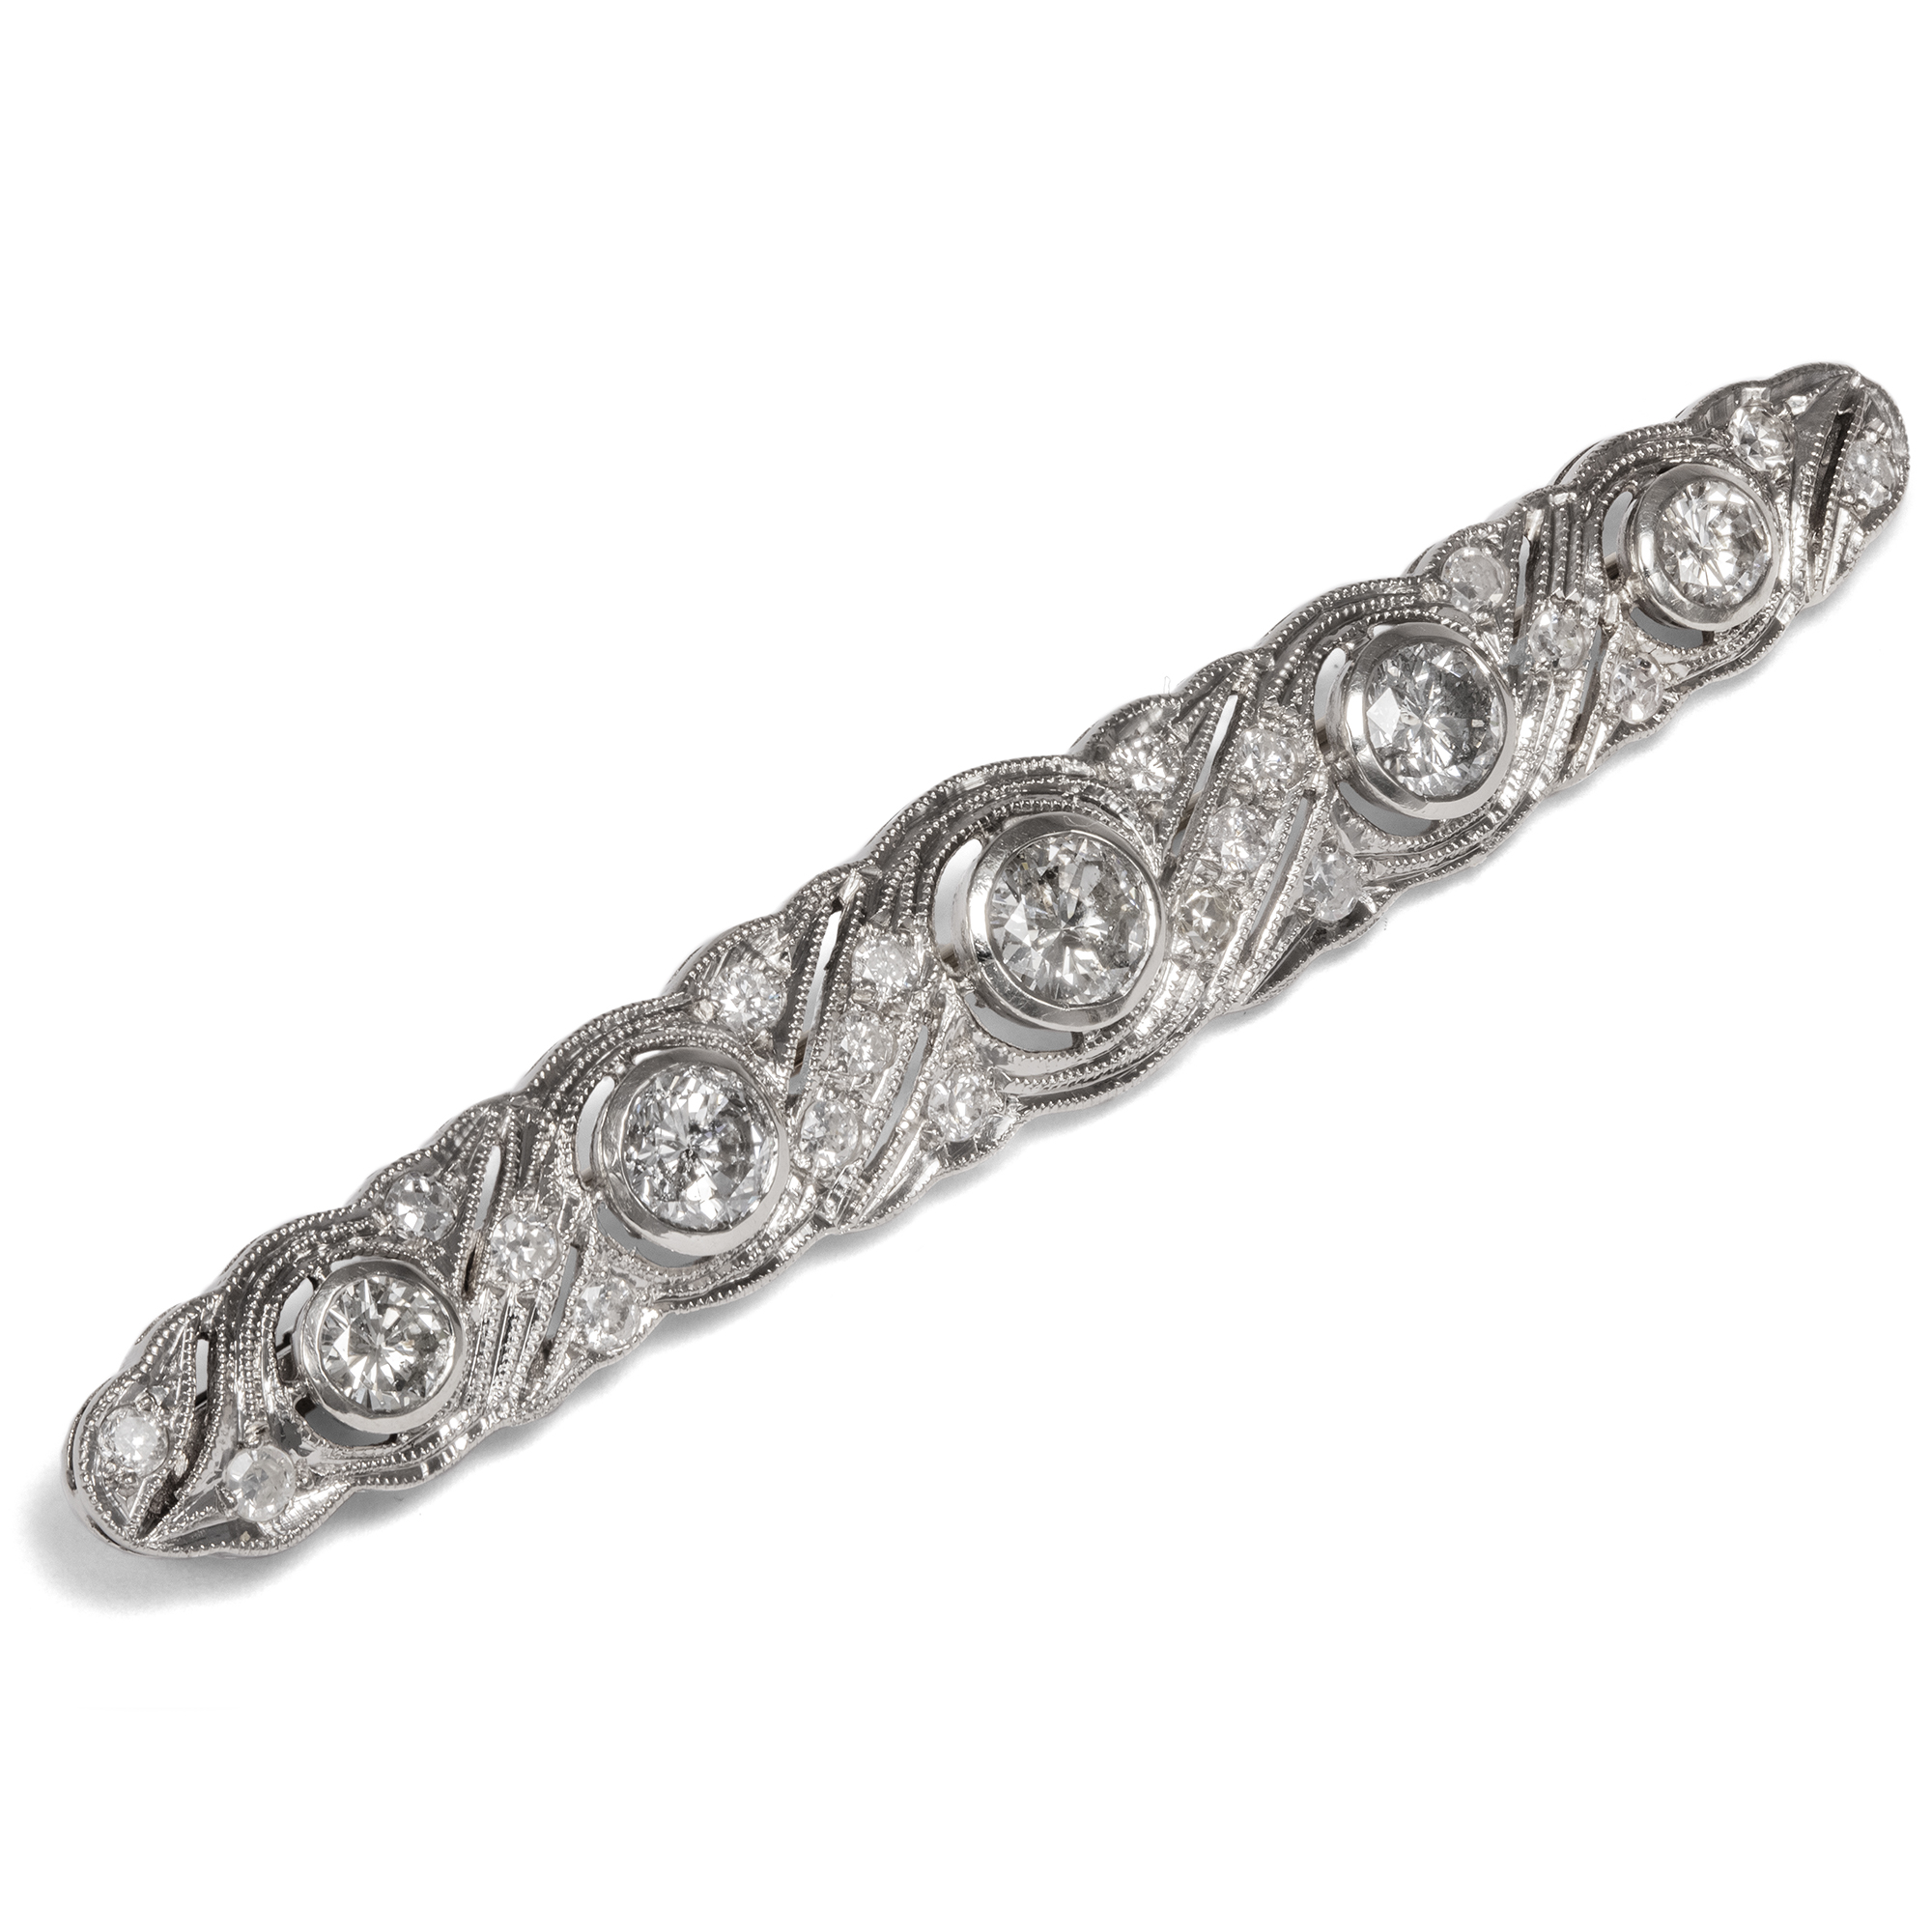 Wonderful Bar Brooch With 2.35 ct Diamonds in White Gold, Art Deco ca. 1930